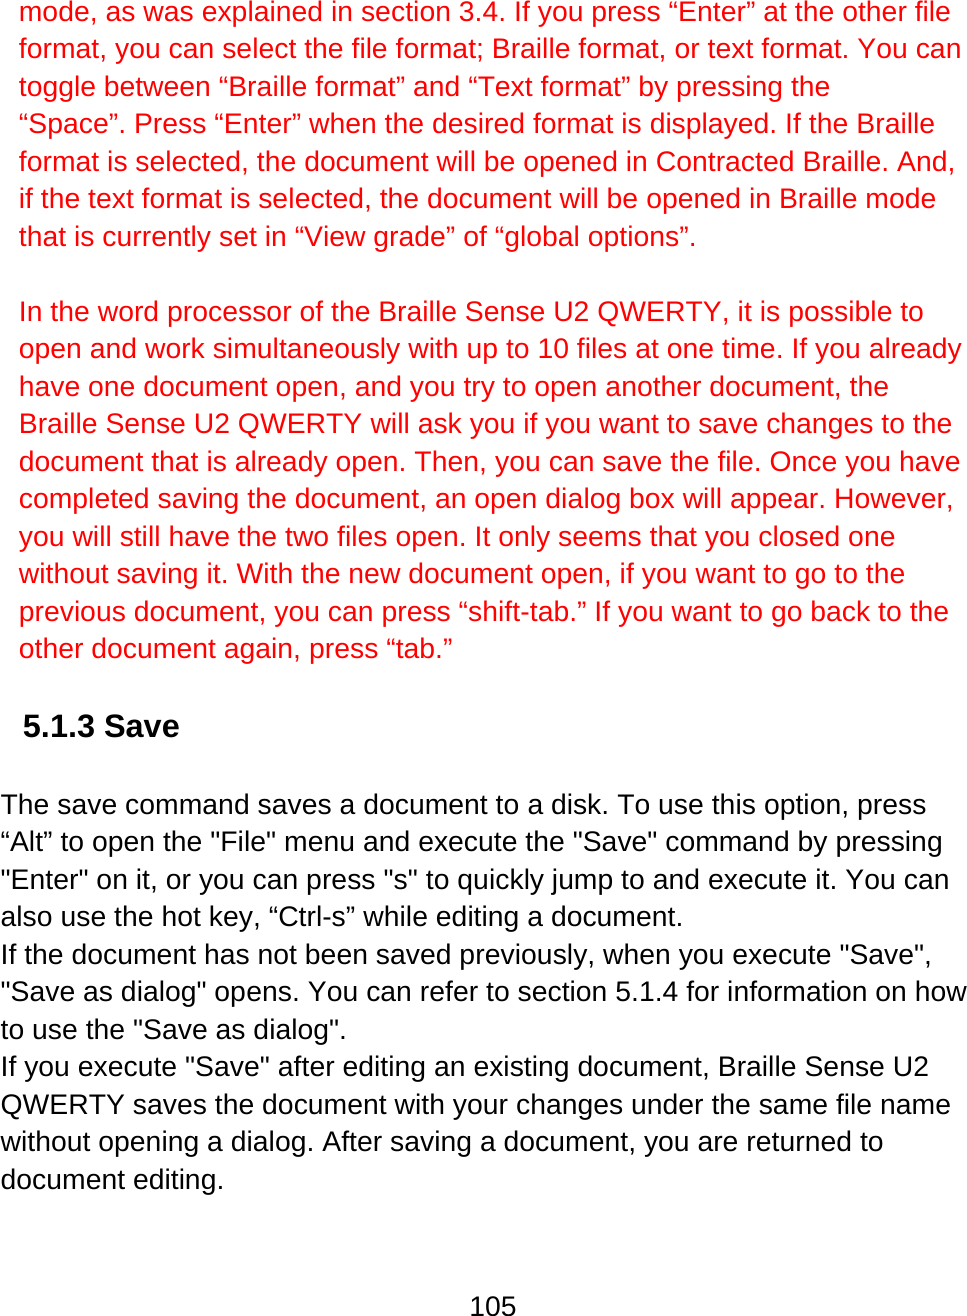 105  mode, as was explained in section 3.4. If you press “Enter” at the other file format, you can select the file format; Braille format, or text format. You can toggle between “Braille format” and “Text format” by pressing the “Space”. Press “Enter” when the desired format is displayed. If the Braille format is selected, the document will be opened in Contracted Braille. And, if the text format is selected, the document will be opened in Braille mode that is currently set in “View grade” of “global options”.  In the word processor of the Braille Sense U2 QWERTY, it is possible to open and work simultaneously with up to 10 files at one time. If you already have one document open, and you try to open another document, the Braille Sense U2 QWERTY will ask you if you want to save changes to the document that is already open. Then, you can save the file. Once you have completed saving the document, an open dialog box will appear. However, you will still have the two files open. It only seems that you closed one without saving it. With the new document open, if you want to go to the previous document, you can press “shift-tab.” If you want to go back to the other document again, press “tab.”  5.1.3 Save  The save command saves a document to a disk. To use this option, press “Alt” to open the &quot;File&quot; menu and execute the &quot;Save&quot; command by pressing &quot;Enter&quot; on it, or you can press &quot;s&quot; to quickly jump to and execute it. You can also use the hot key, “Ctrl-s” while editing a document. If the document has not been saved previously, when you execute &quot;Save&quot;, &quot;Save as dialog&quot; opens. You can refer to section 5.1.4 for information on how to use the &quot;Save as dialog&quot;. If you execute &quot;Save&quot; after editing an existing document, Braille Sense U2 QWERTY saves the document with your changes under the same file name without opening a dialog. After saving a document, you are returned to document editing.  